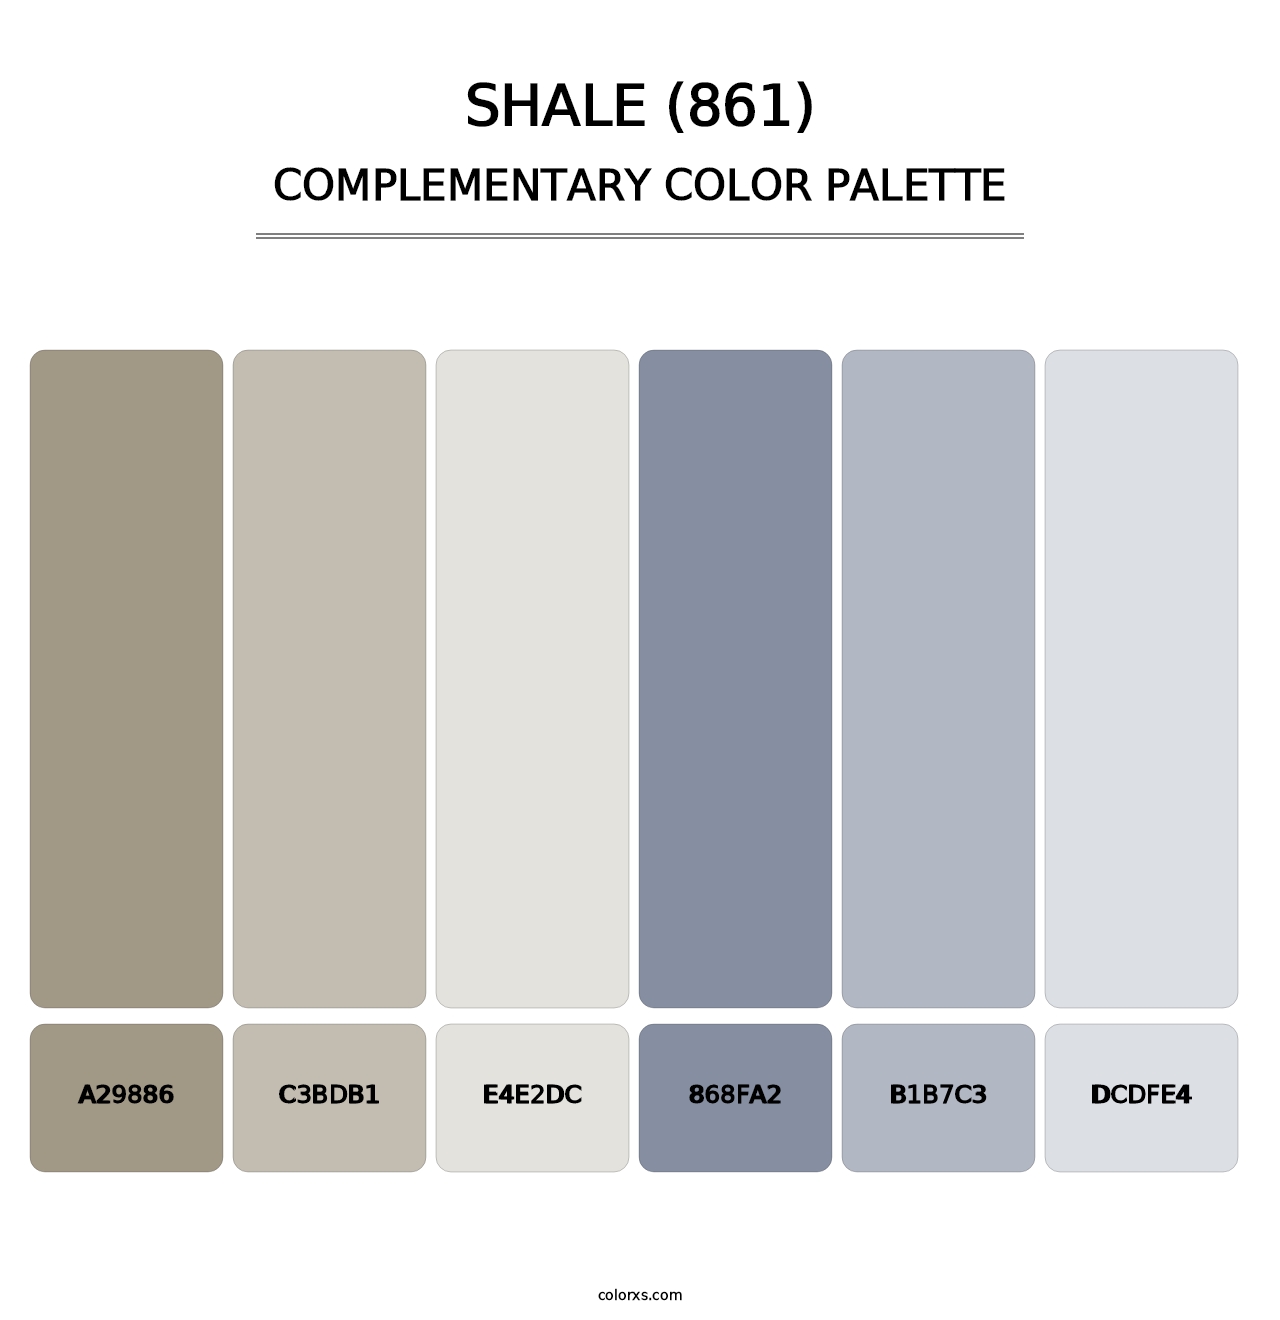 Shale (861) - Complementary Color Palette